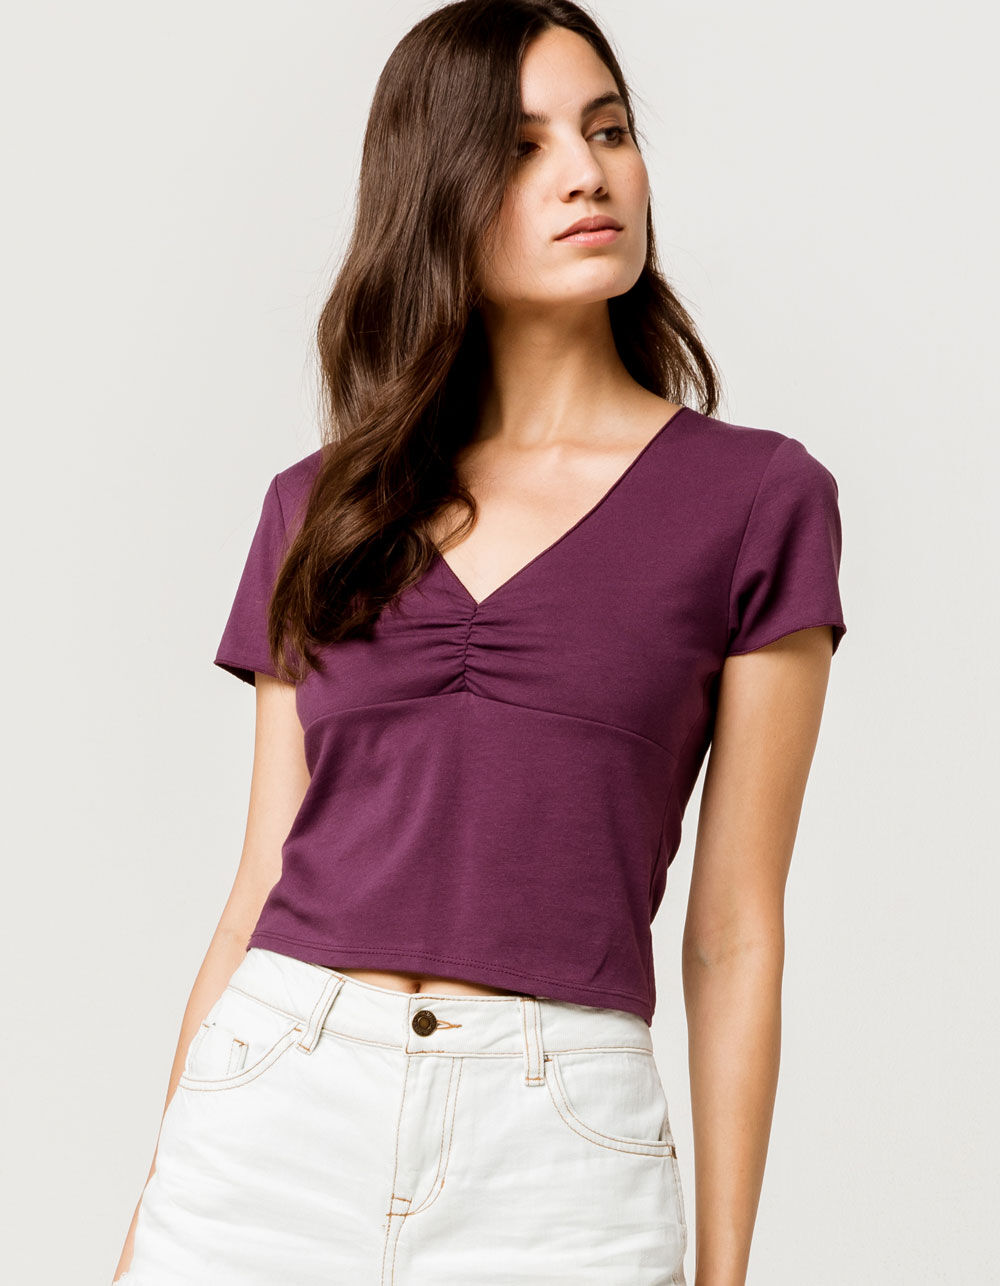 IVY & MAIN Cinched V-Neck Plum Womens Crop Tee image number 0